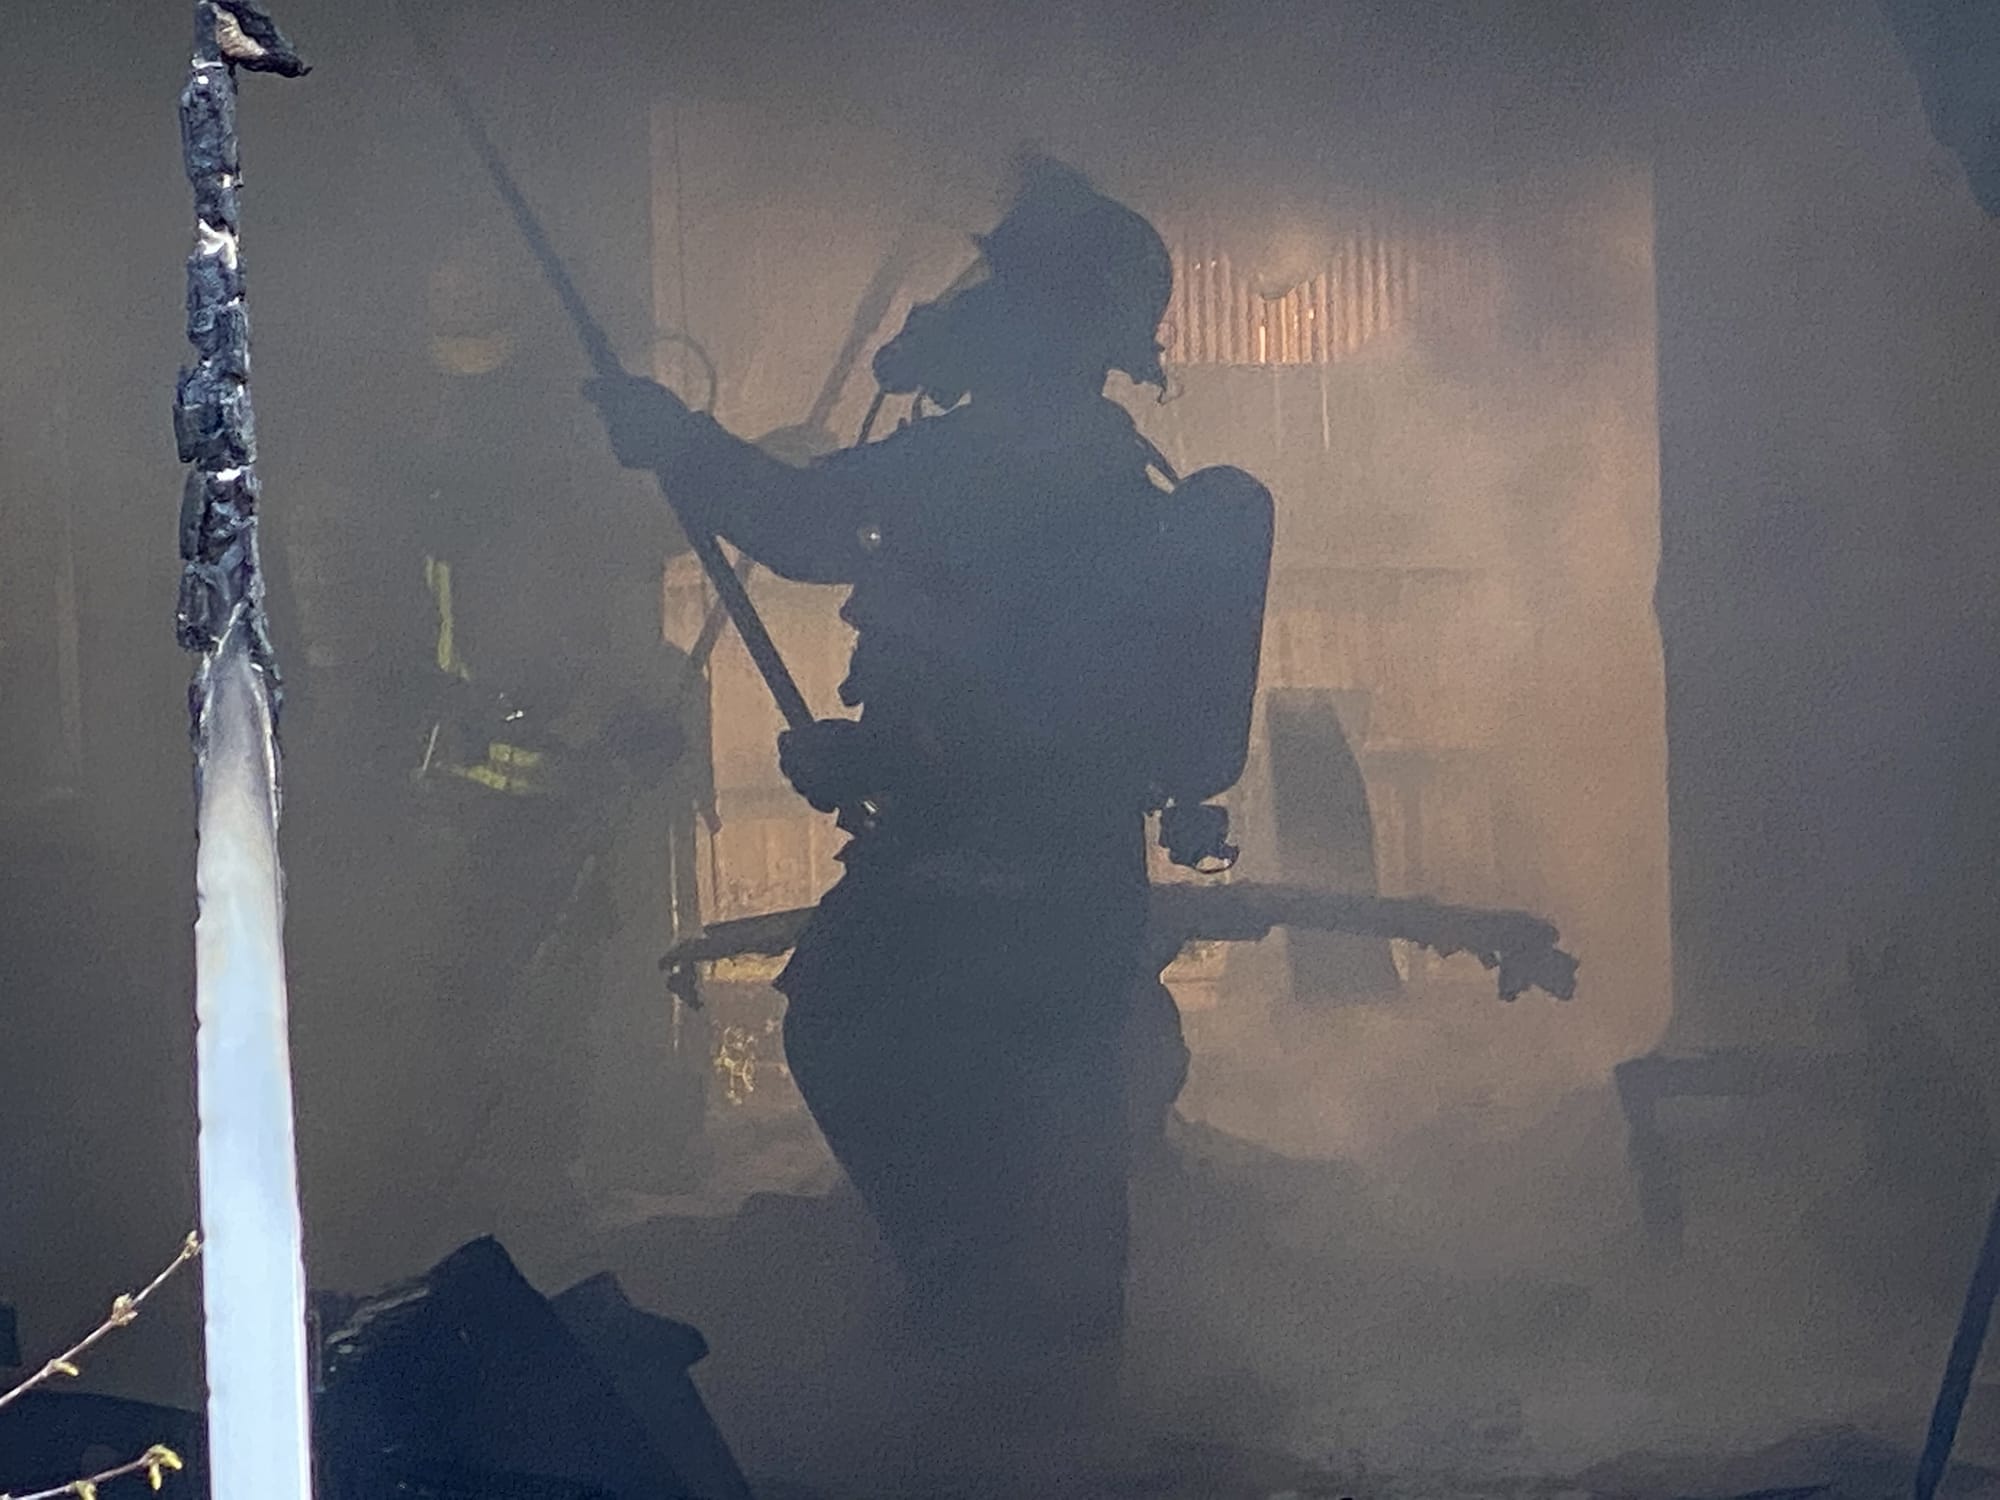 A firefighter responds to a residential fire at 508 N.E. 127th Street on Friday, Feb. 21, 2020.